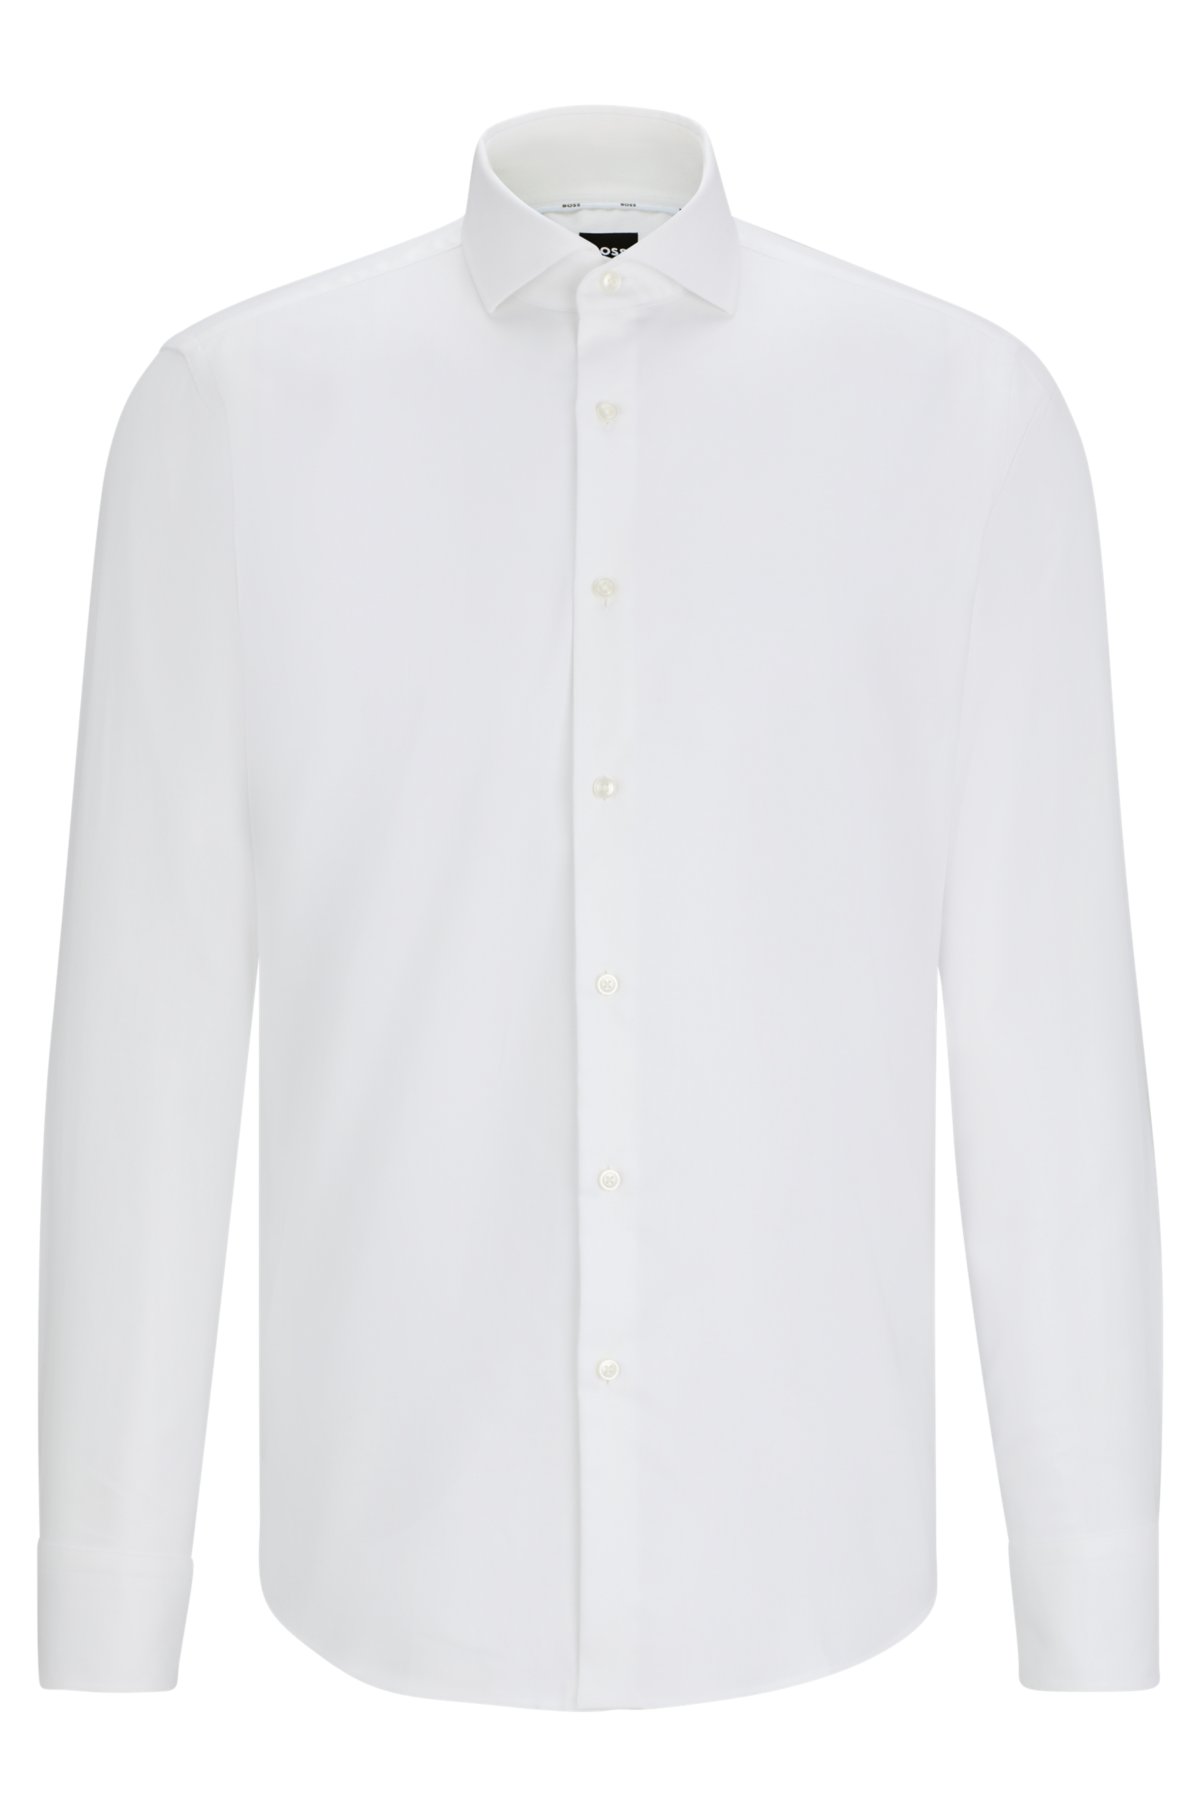 Regular-fit shirt in easy-iron stretch-cotton twill, White